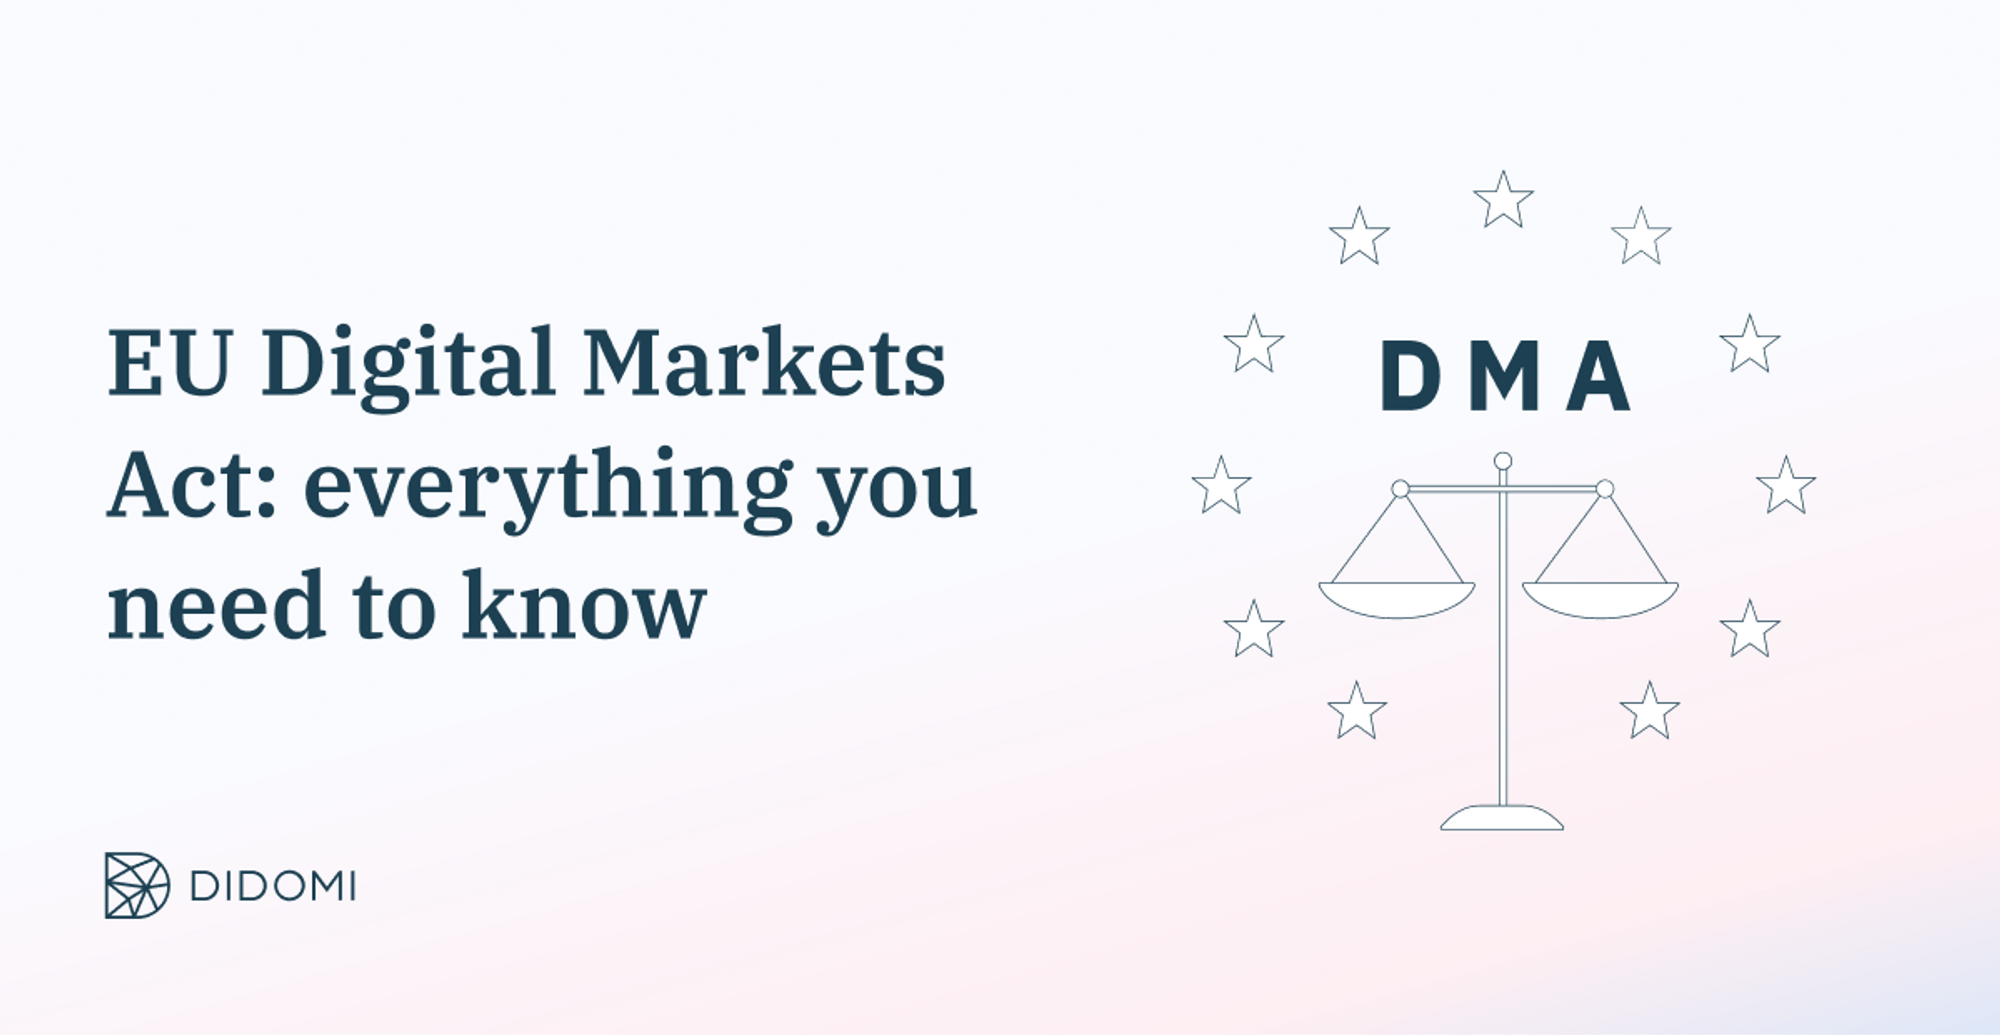 EU Digital Markets Act (DMA): everything you need to know